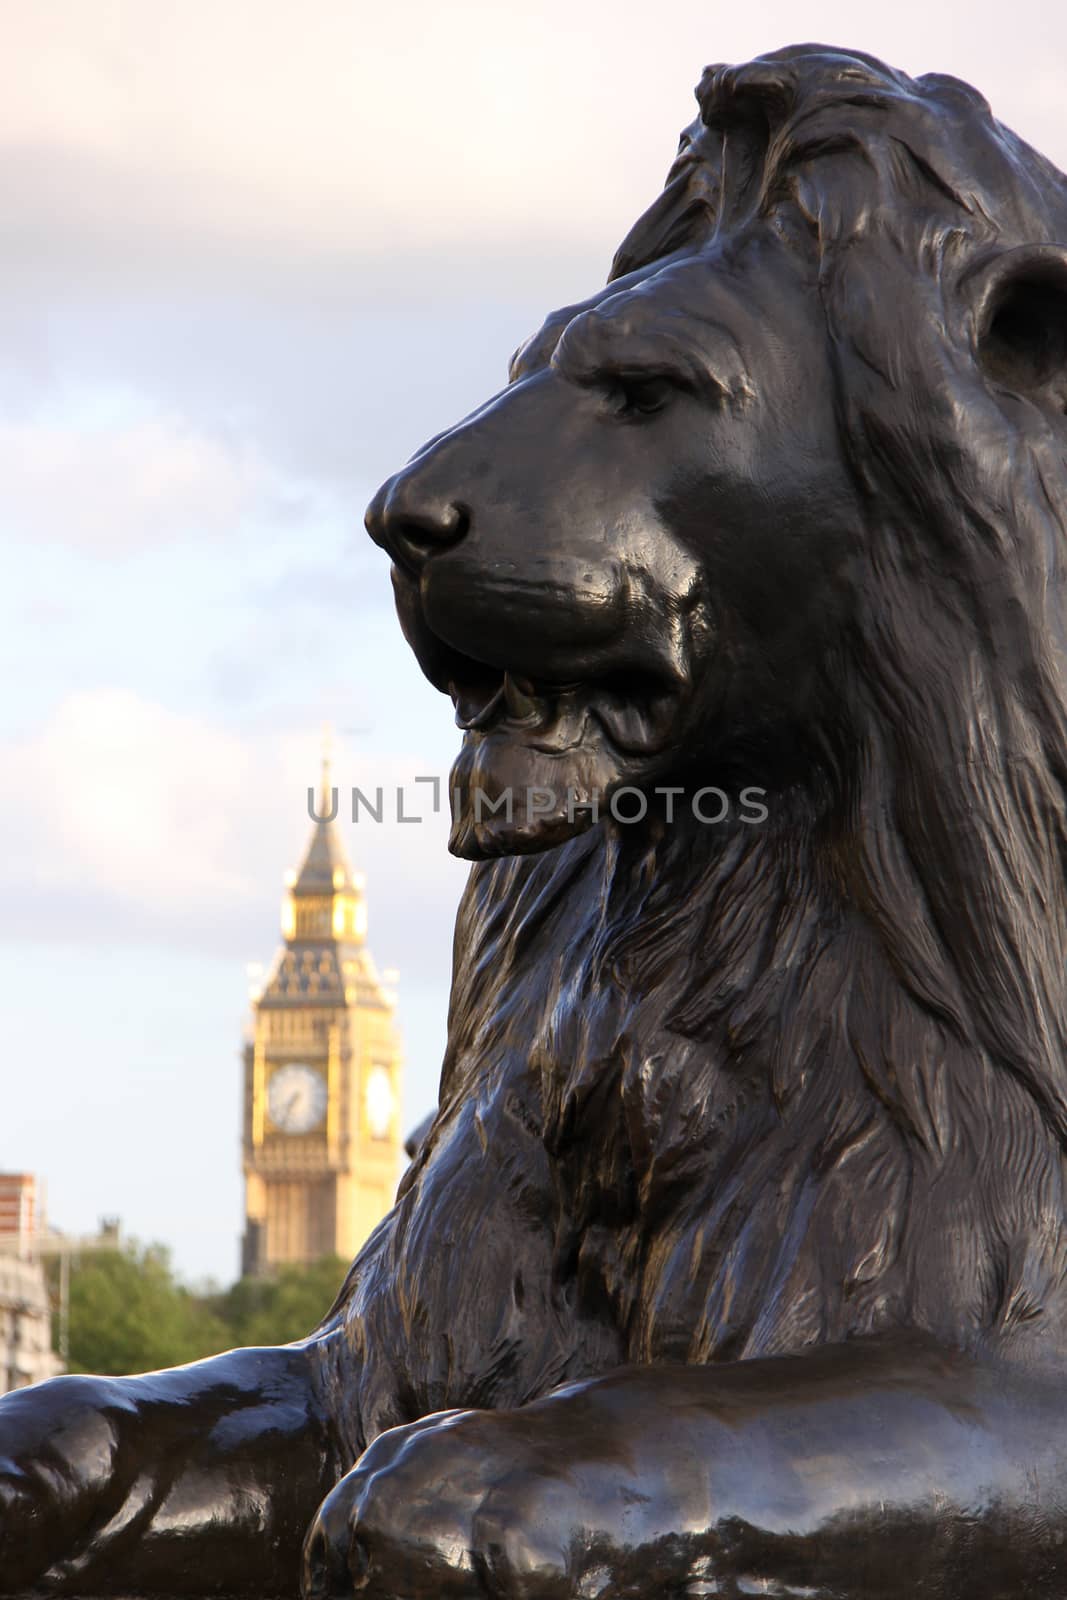 Lion on Trafalgar square with Big ben in background (London, England)